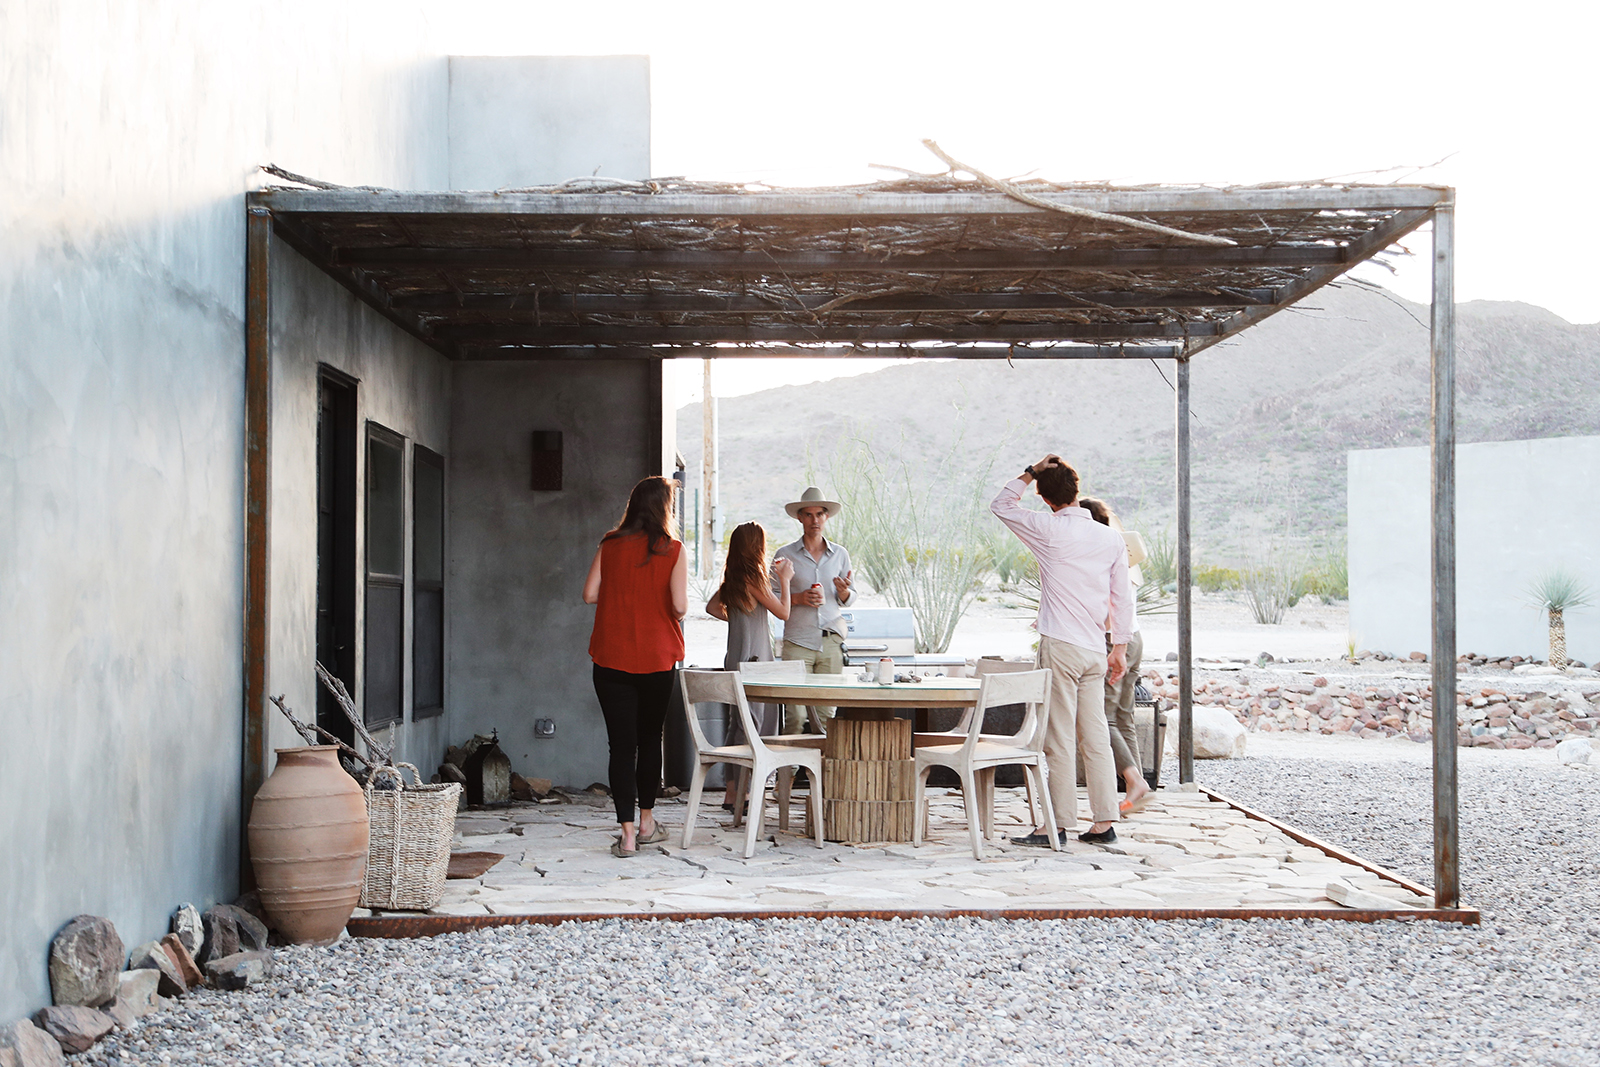 Willow House in Terlingua, Texas